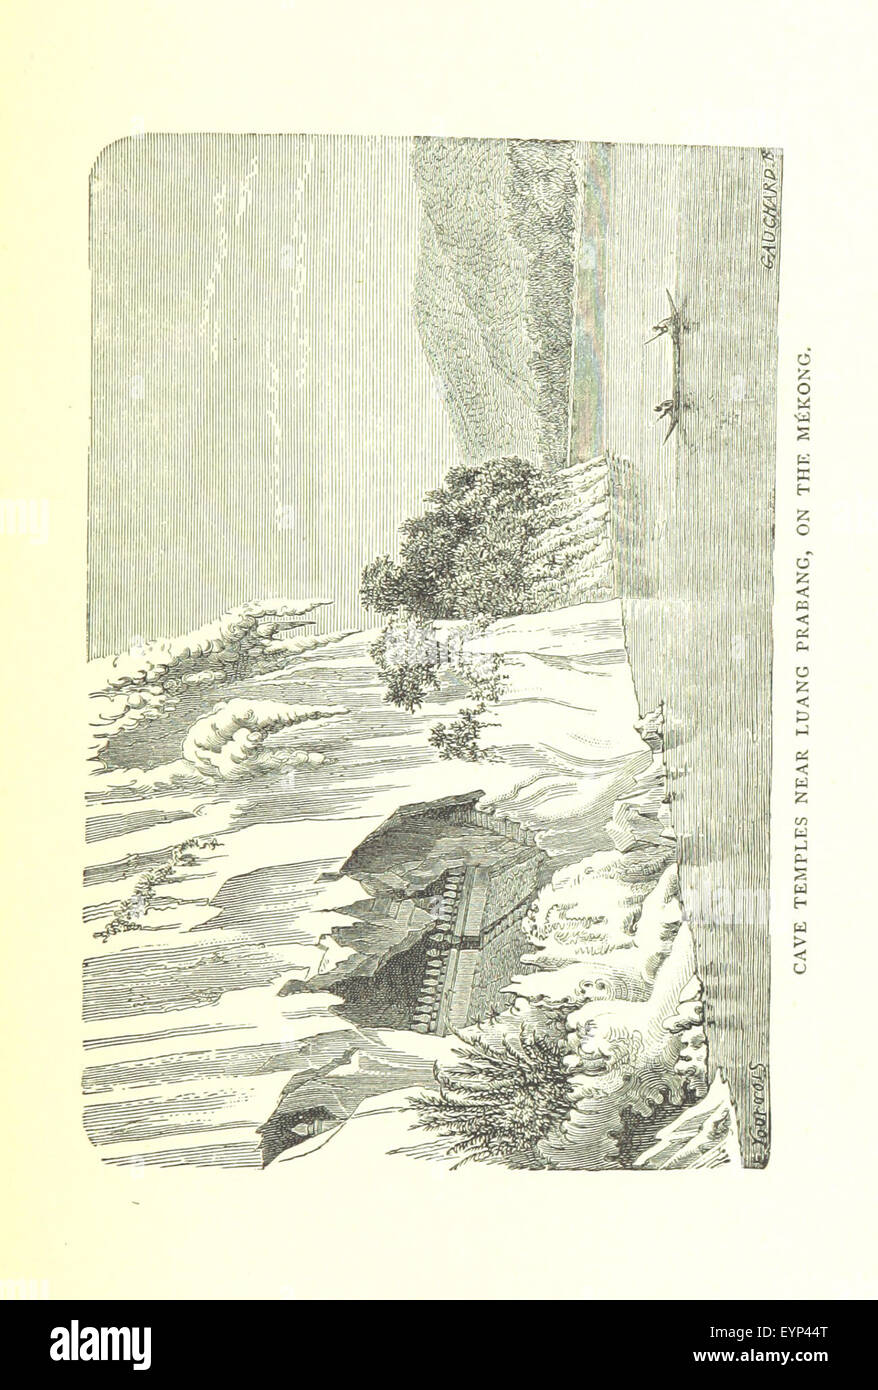 Image taken from page 305 of 'Amongst the Shans ... With ... illustrations, and an historical sketch of the Shans by Holt S. Hallett ... Preceded by an introduction on the cradle of the Shan race by Terrien de Lacouperie' Image taken from page 305 of 'Amongst the Shans Stock Photo